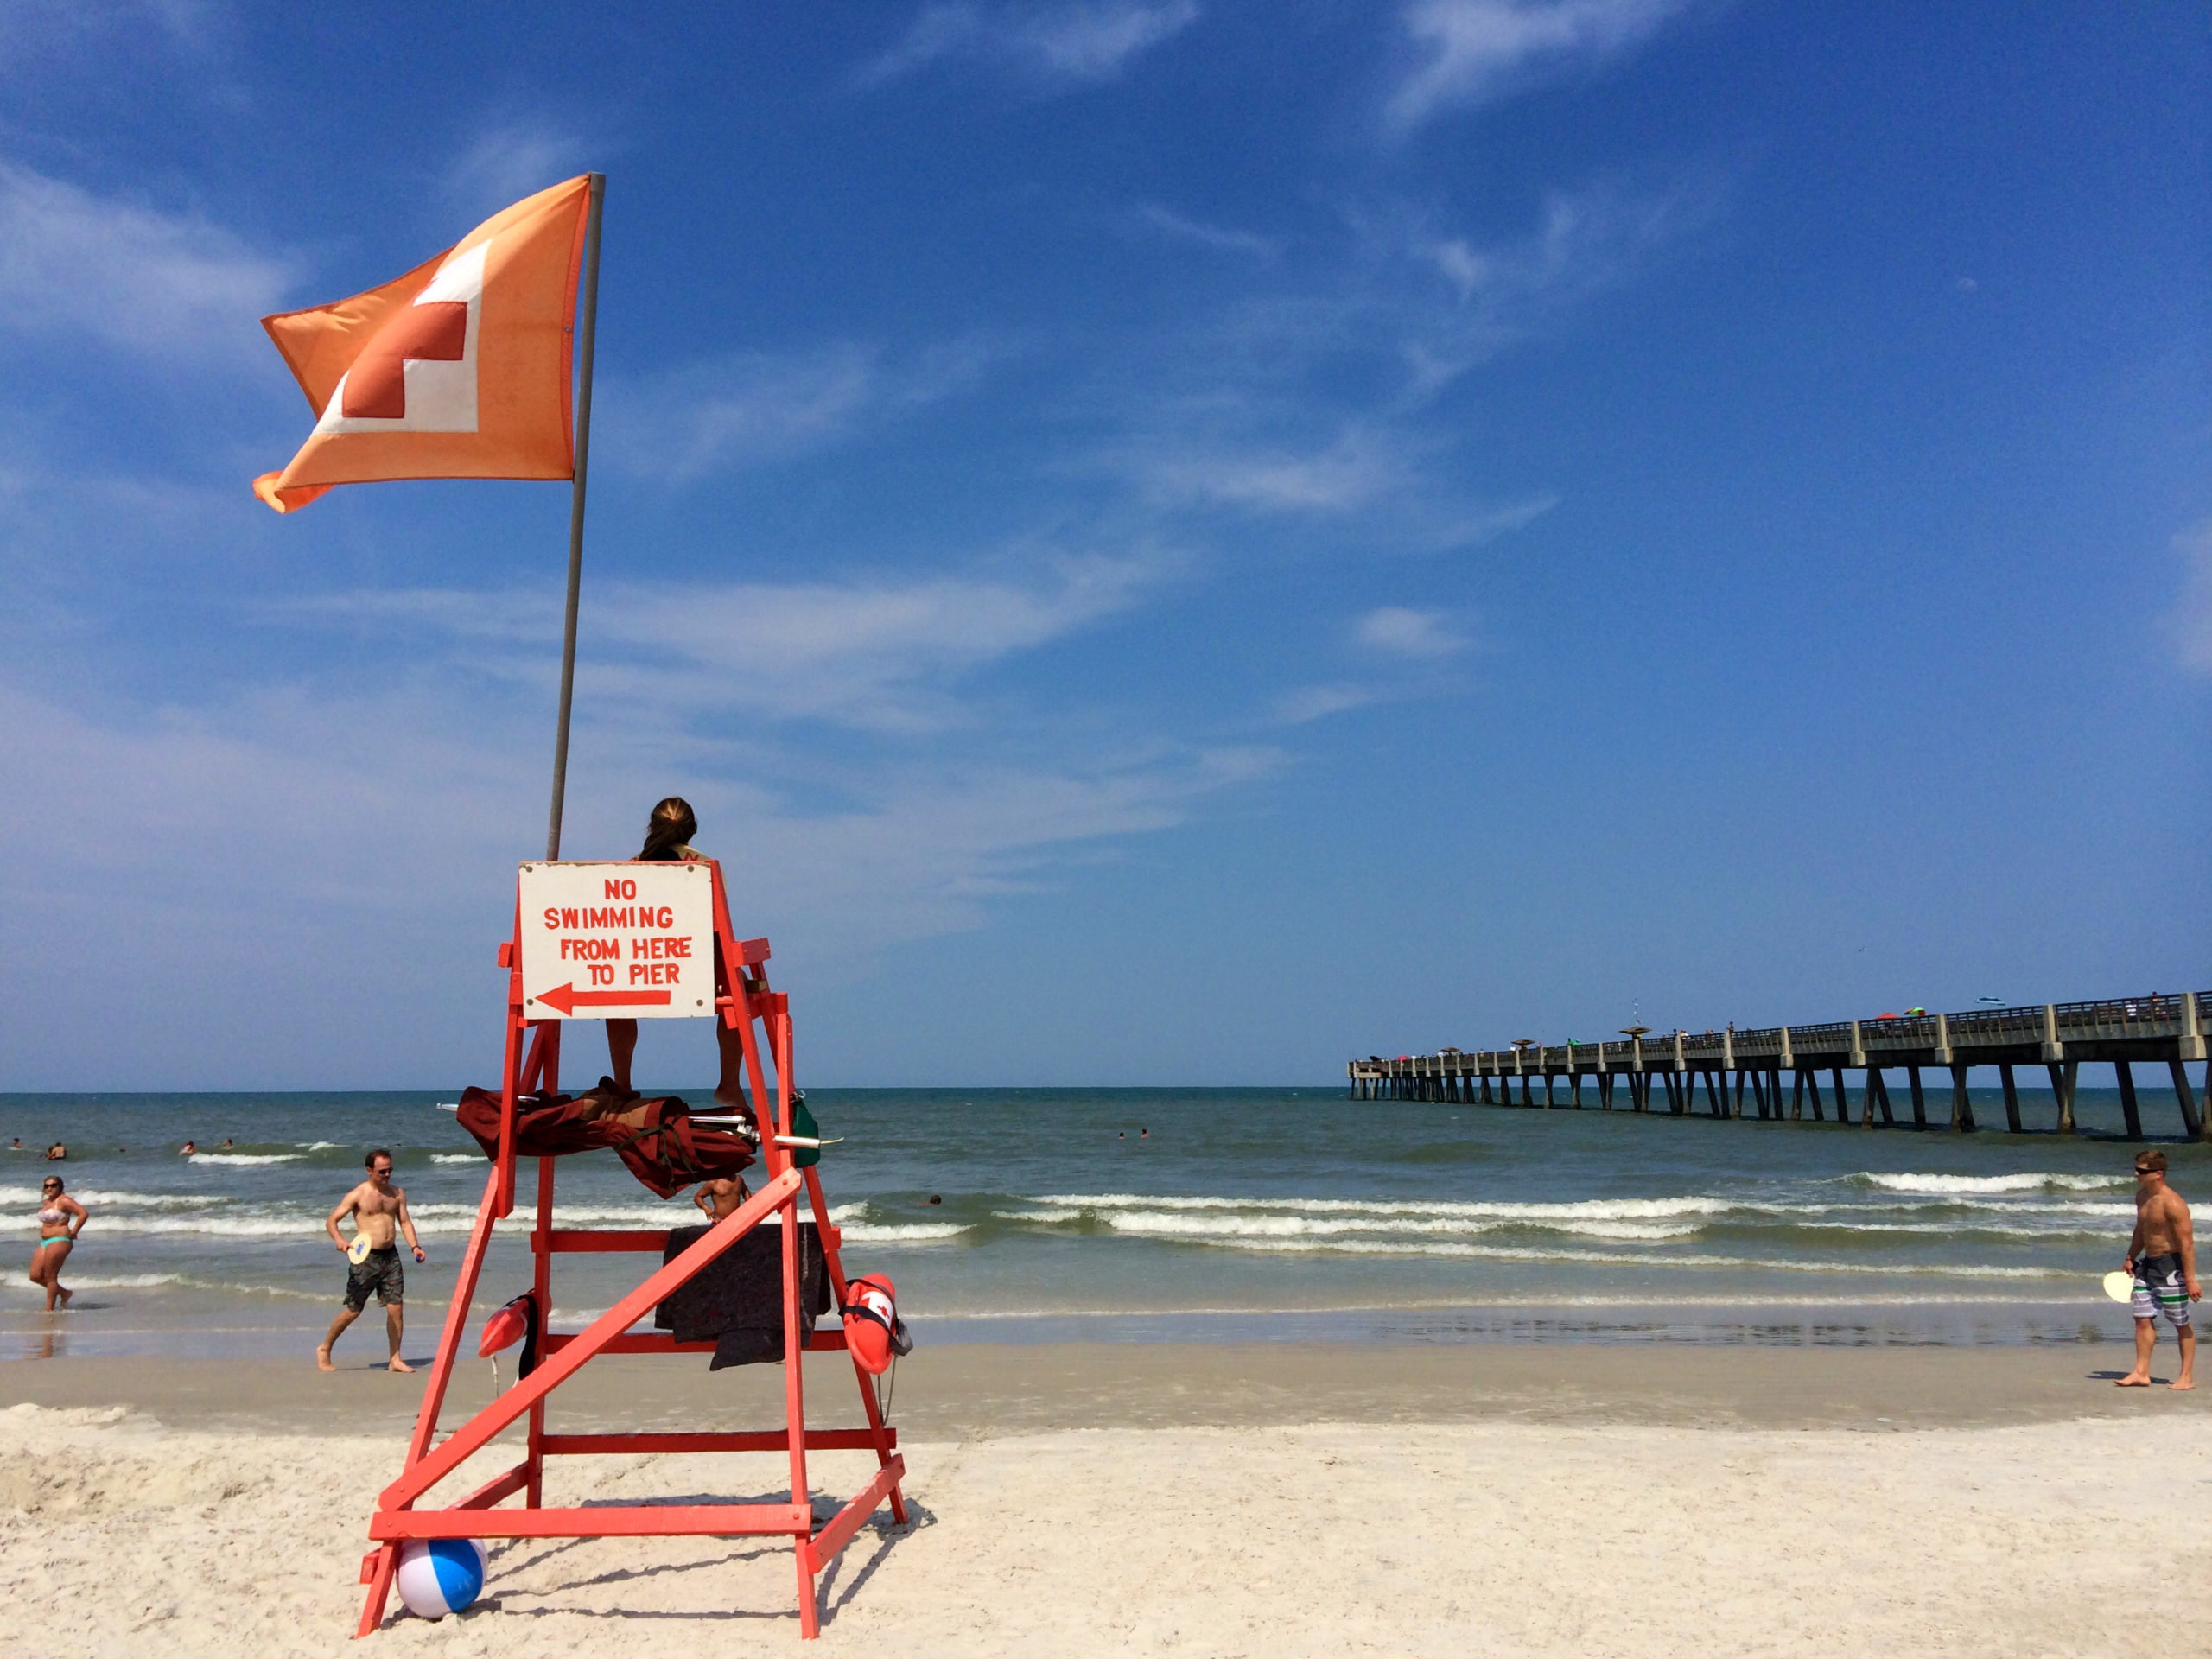 Photo of A lifeguard on duty at a beach